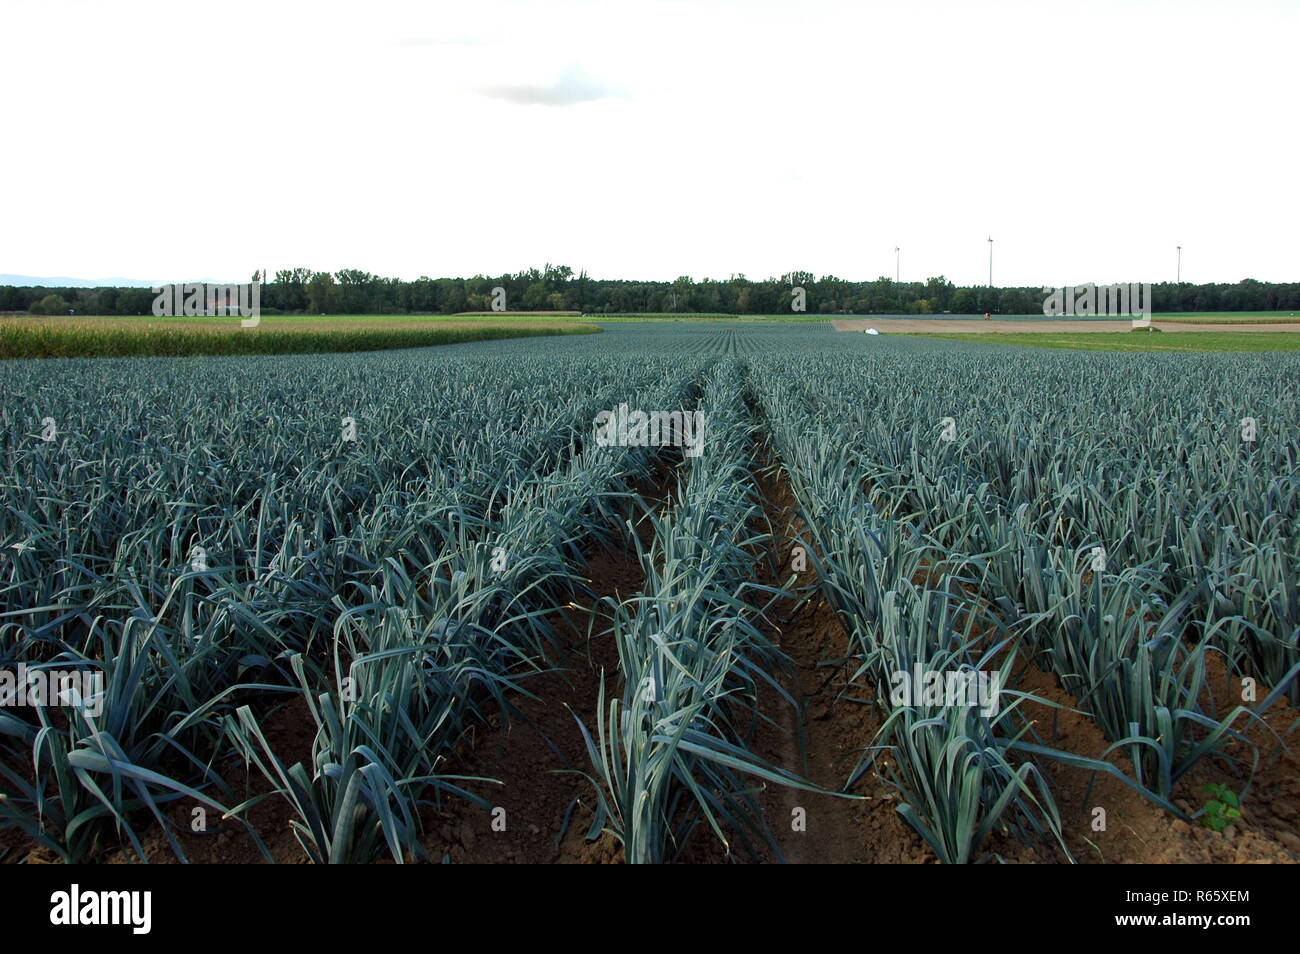 leek cultivation in kandel in the south palatinate Stock Photo